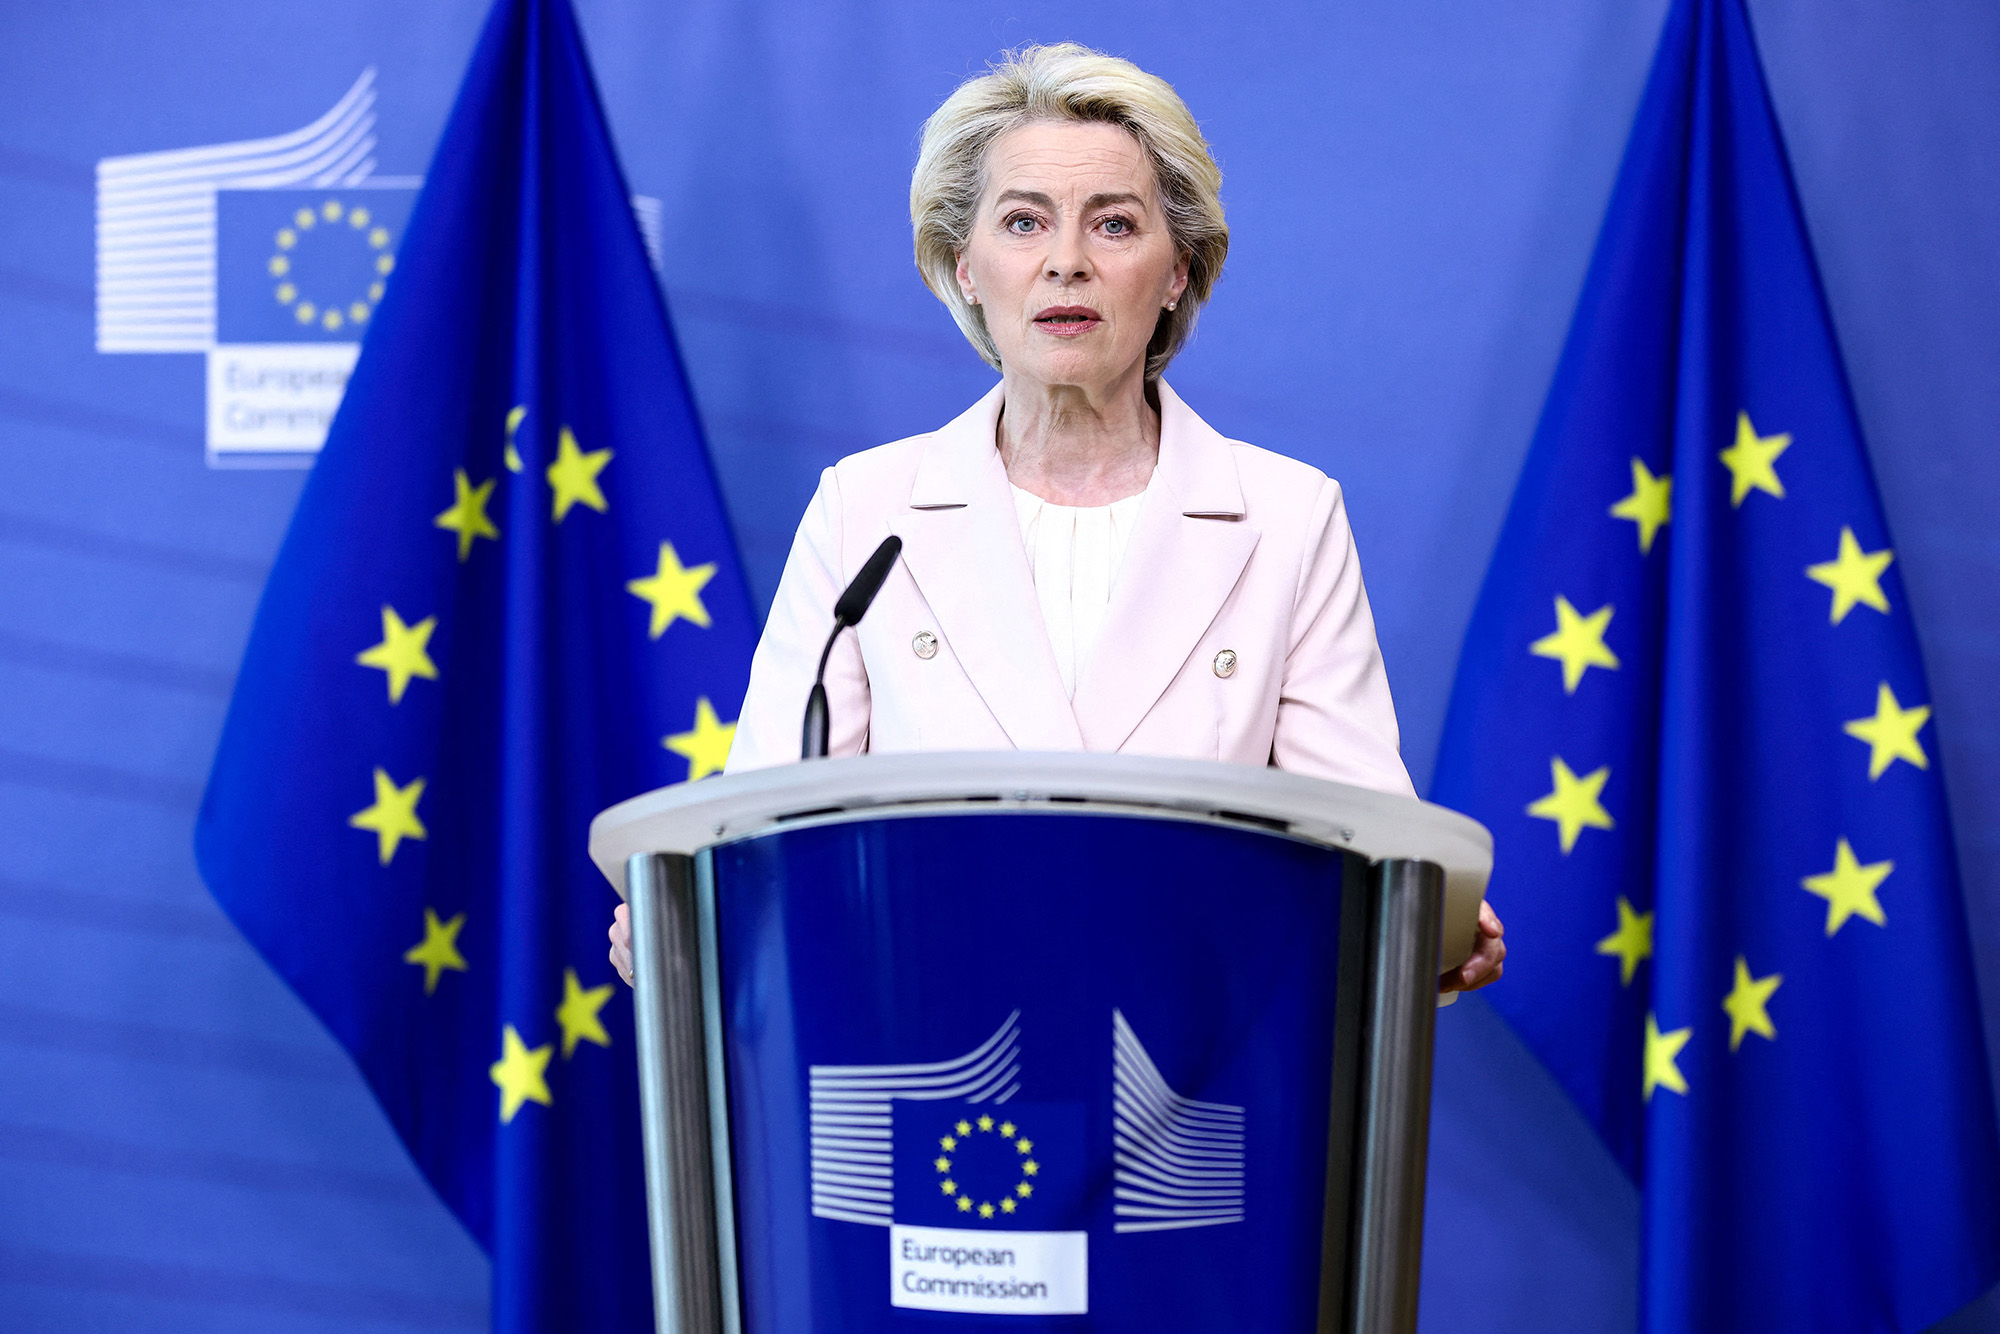 European Commission President Arsula van der Leyen issued a statement on April 27 in Brussels, Belgium, following a decision by Russian energy giant Gazprom to suspend gas supplies to Poland and Bulgaria.